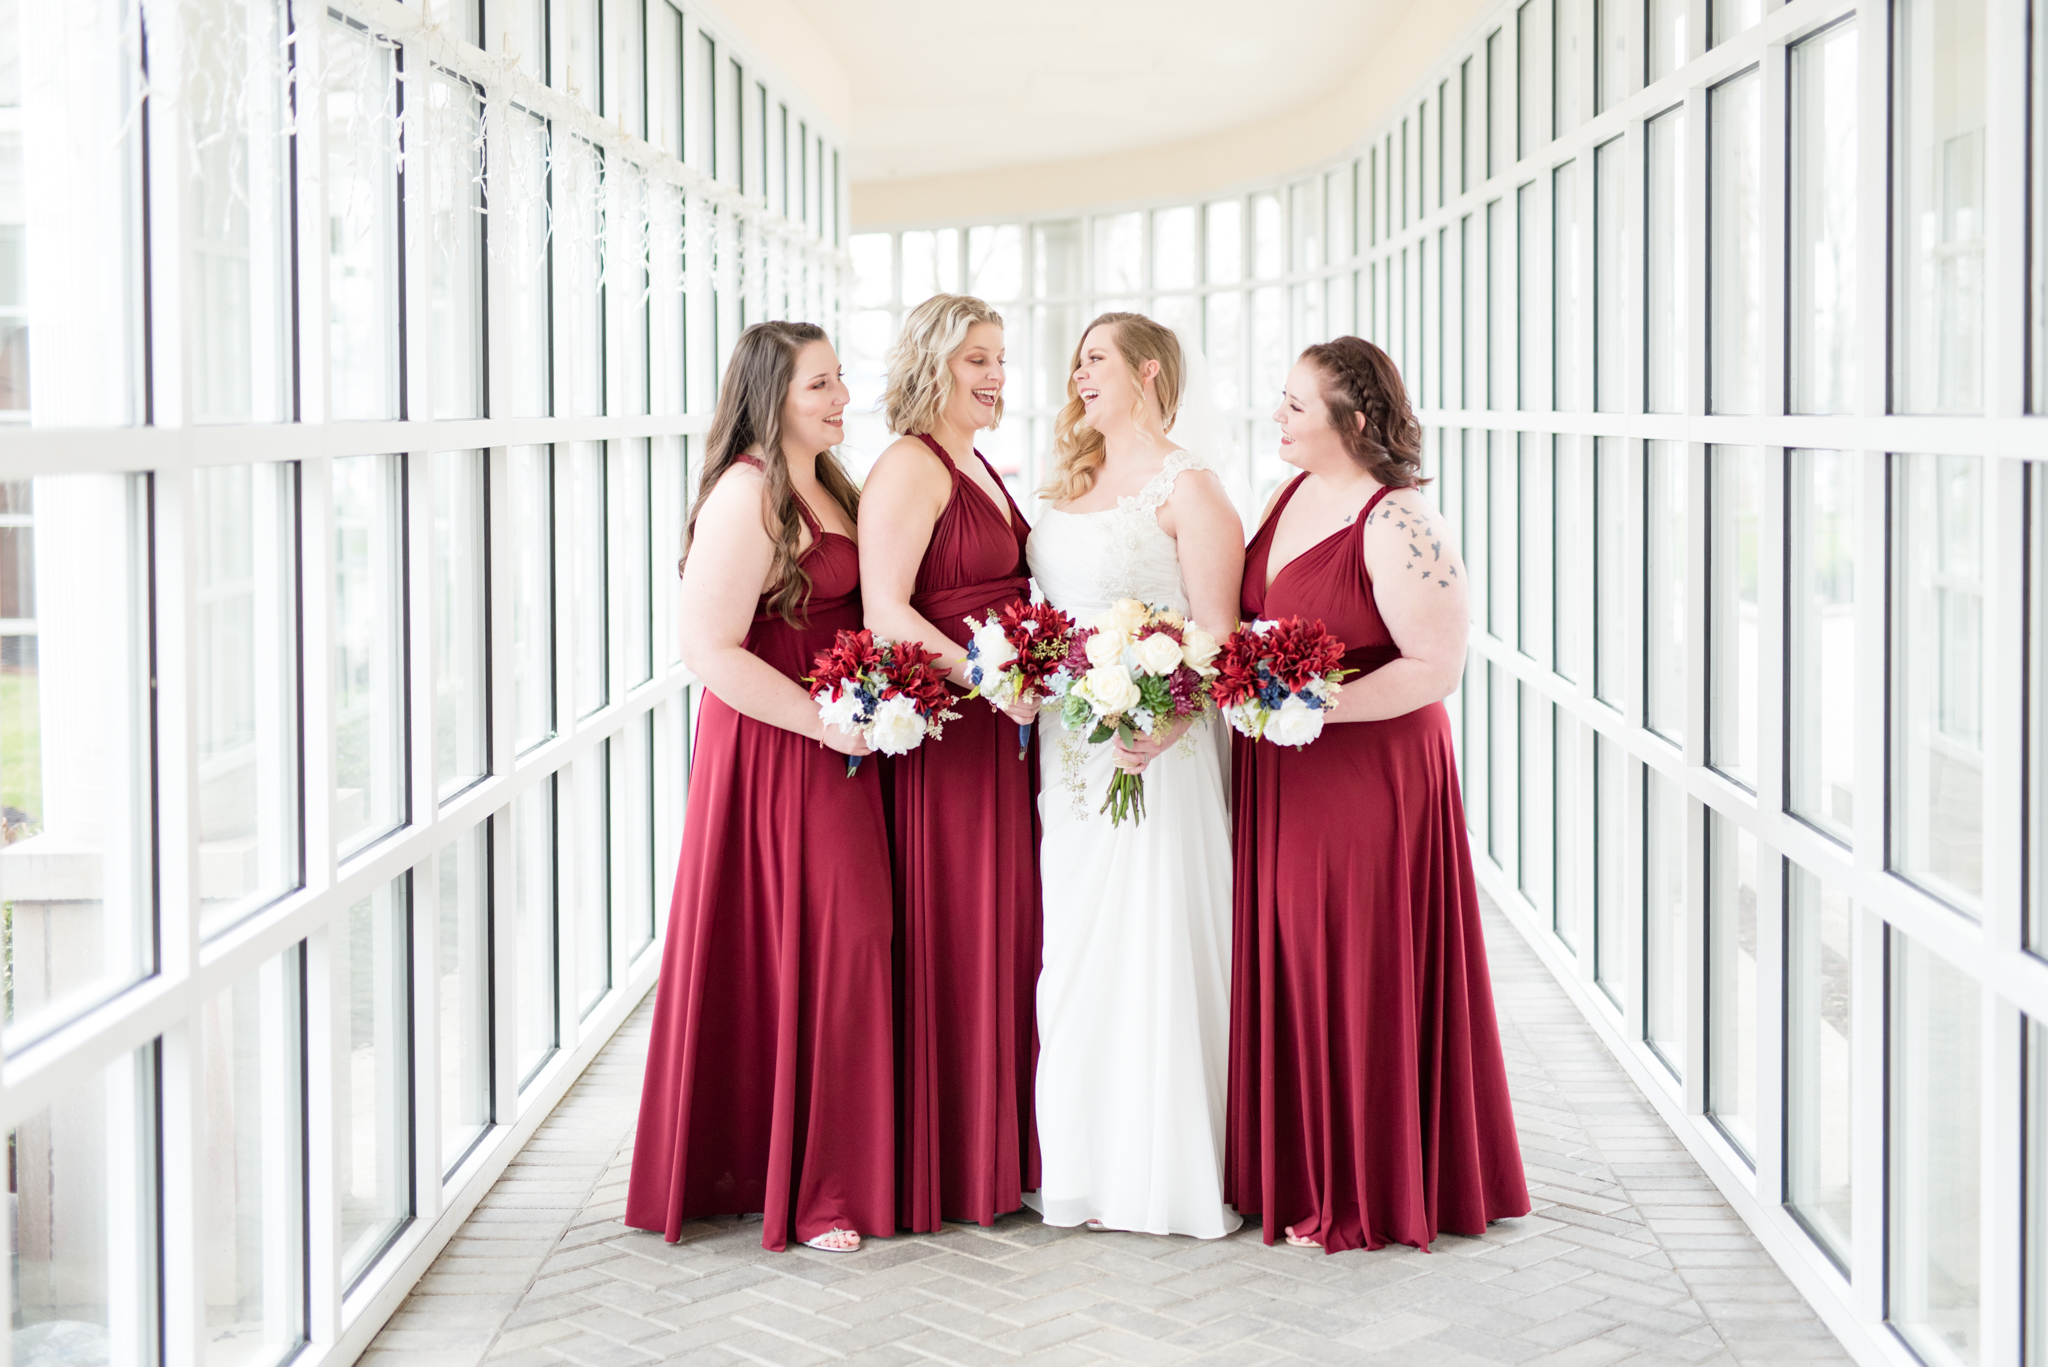 Bridal party laughs together